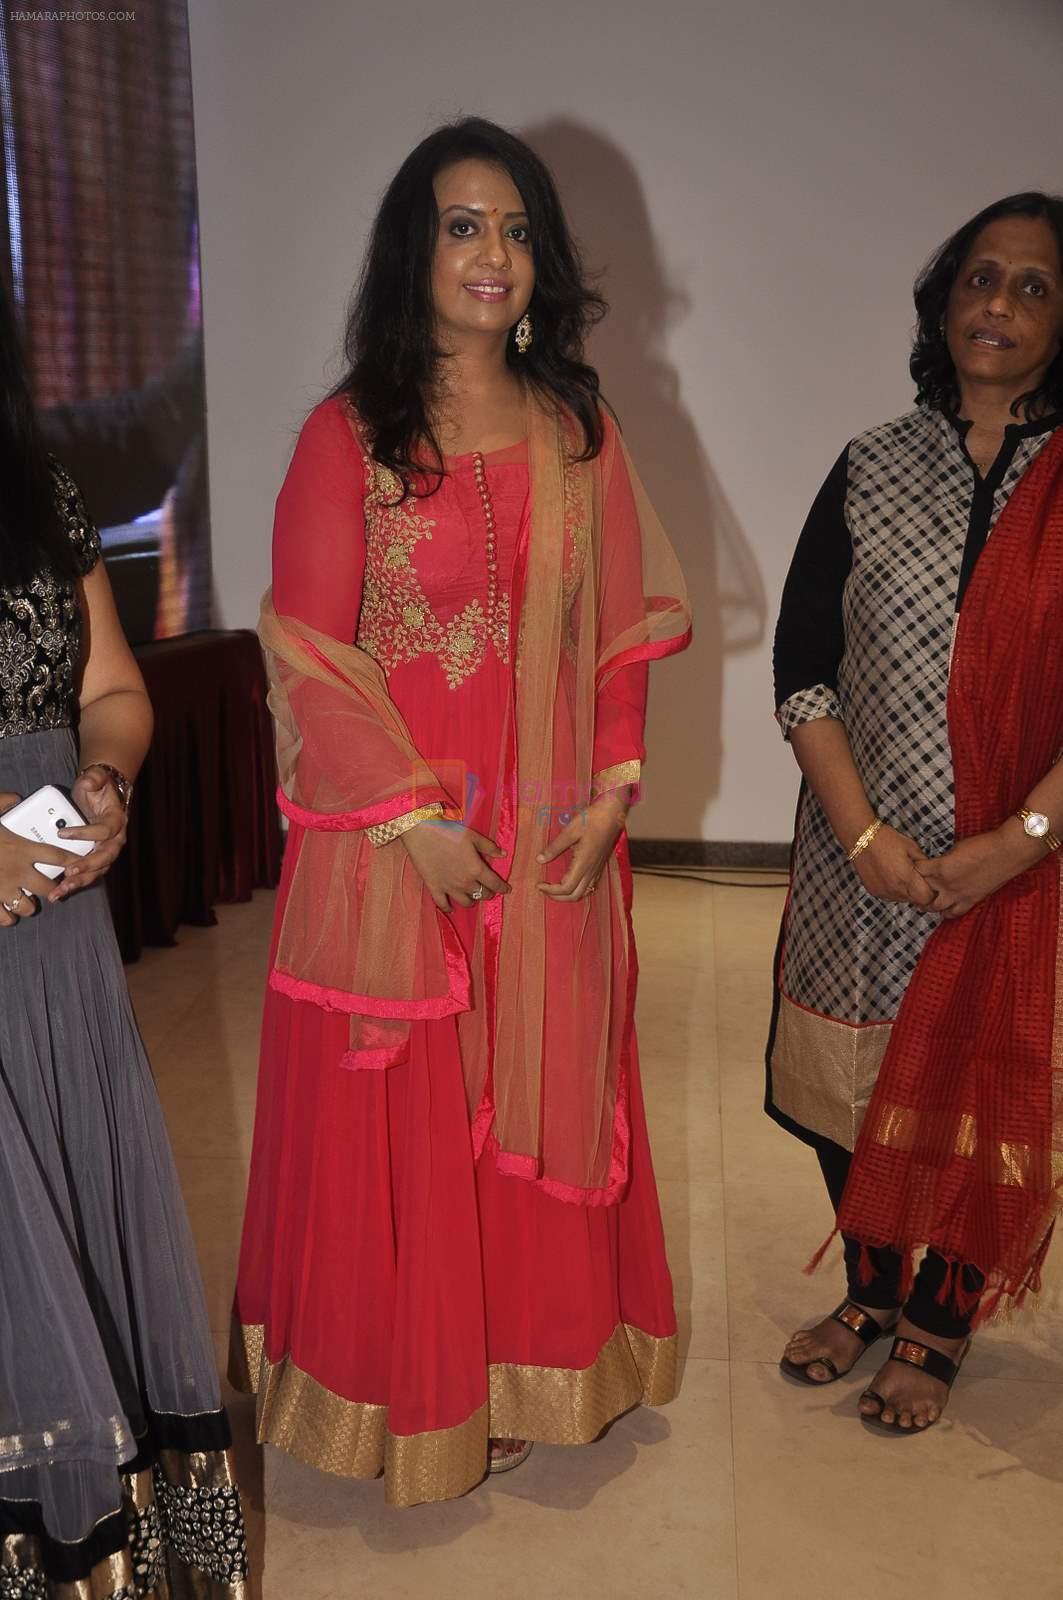 at Excellence Awards by Hallway Foundation on 2nd Aug 2015